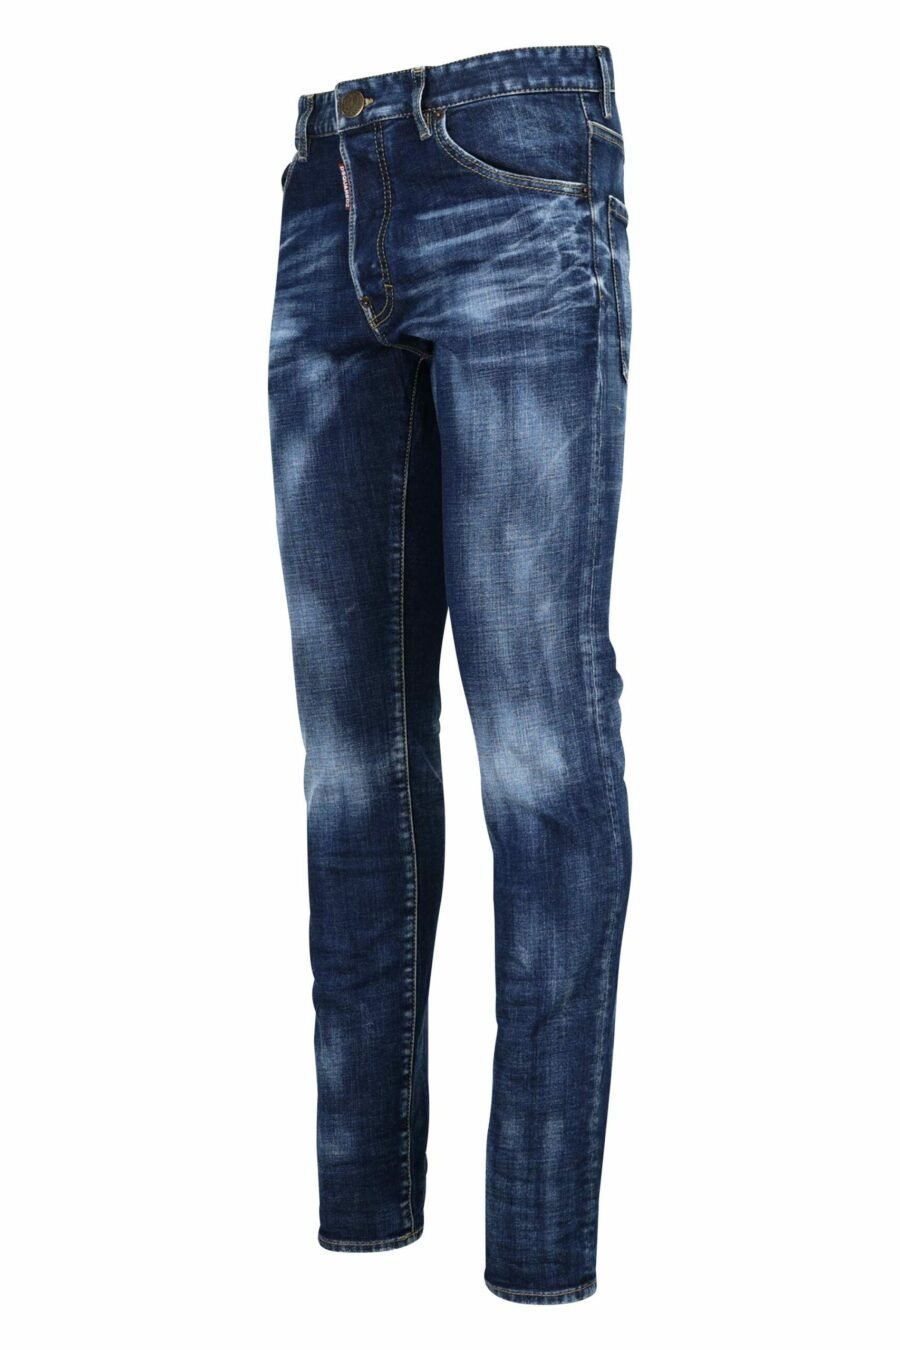 Cool guy jean trousers blue frayed - 8052134970072 1 scaled